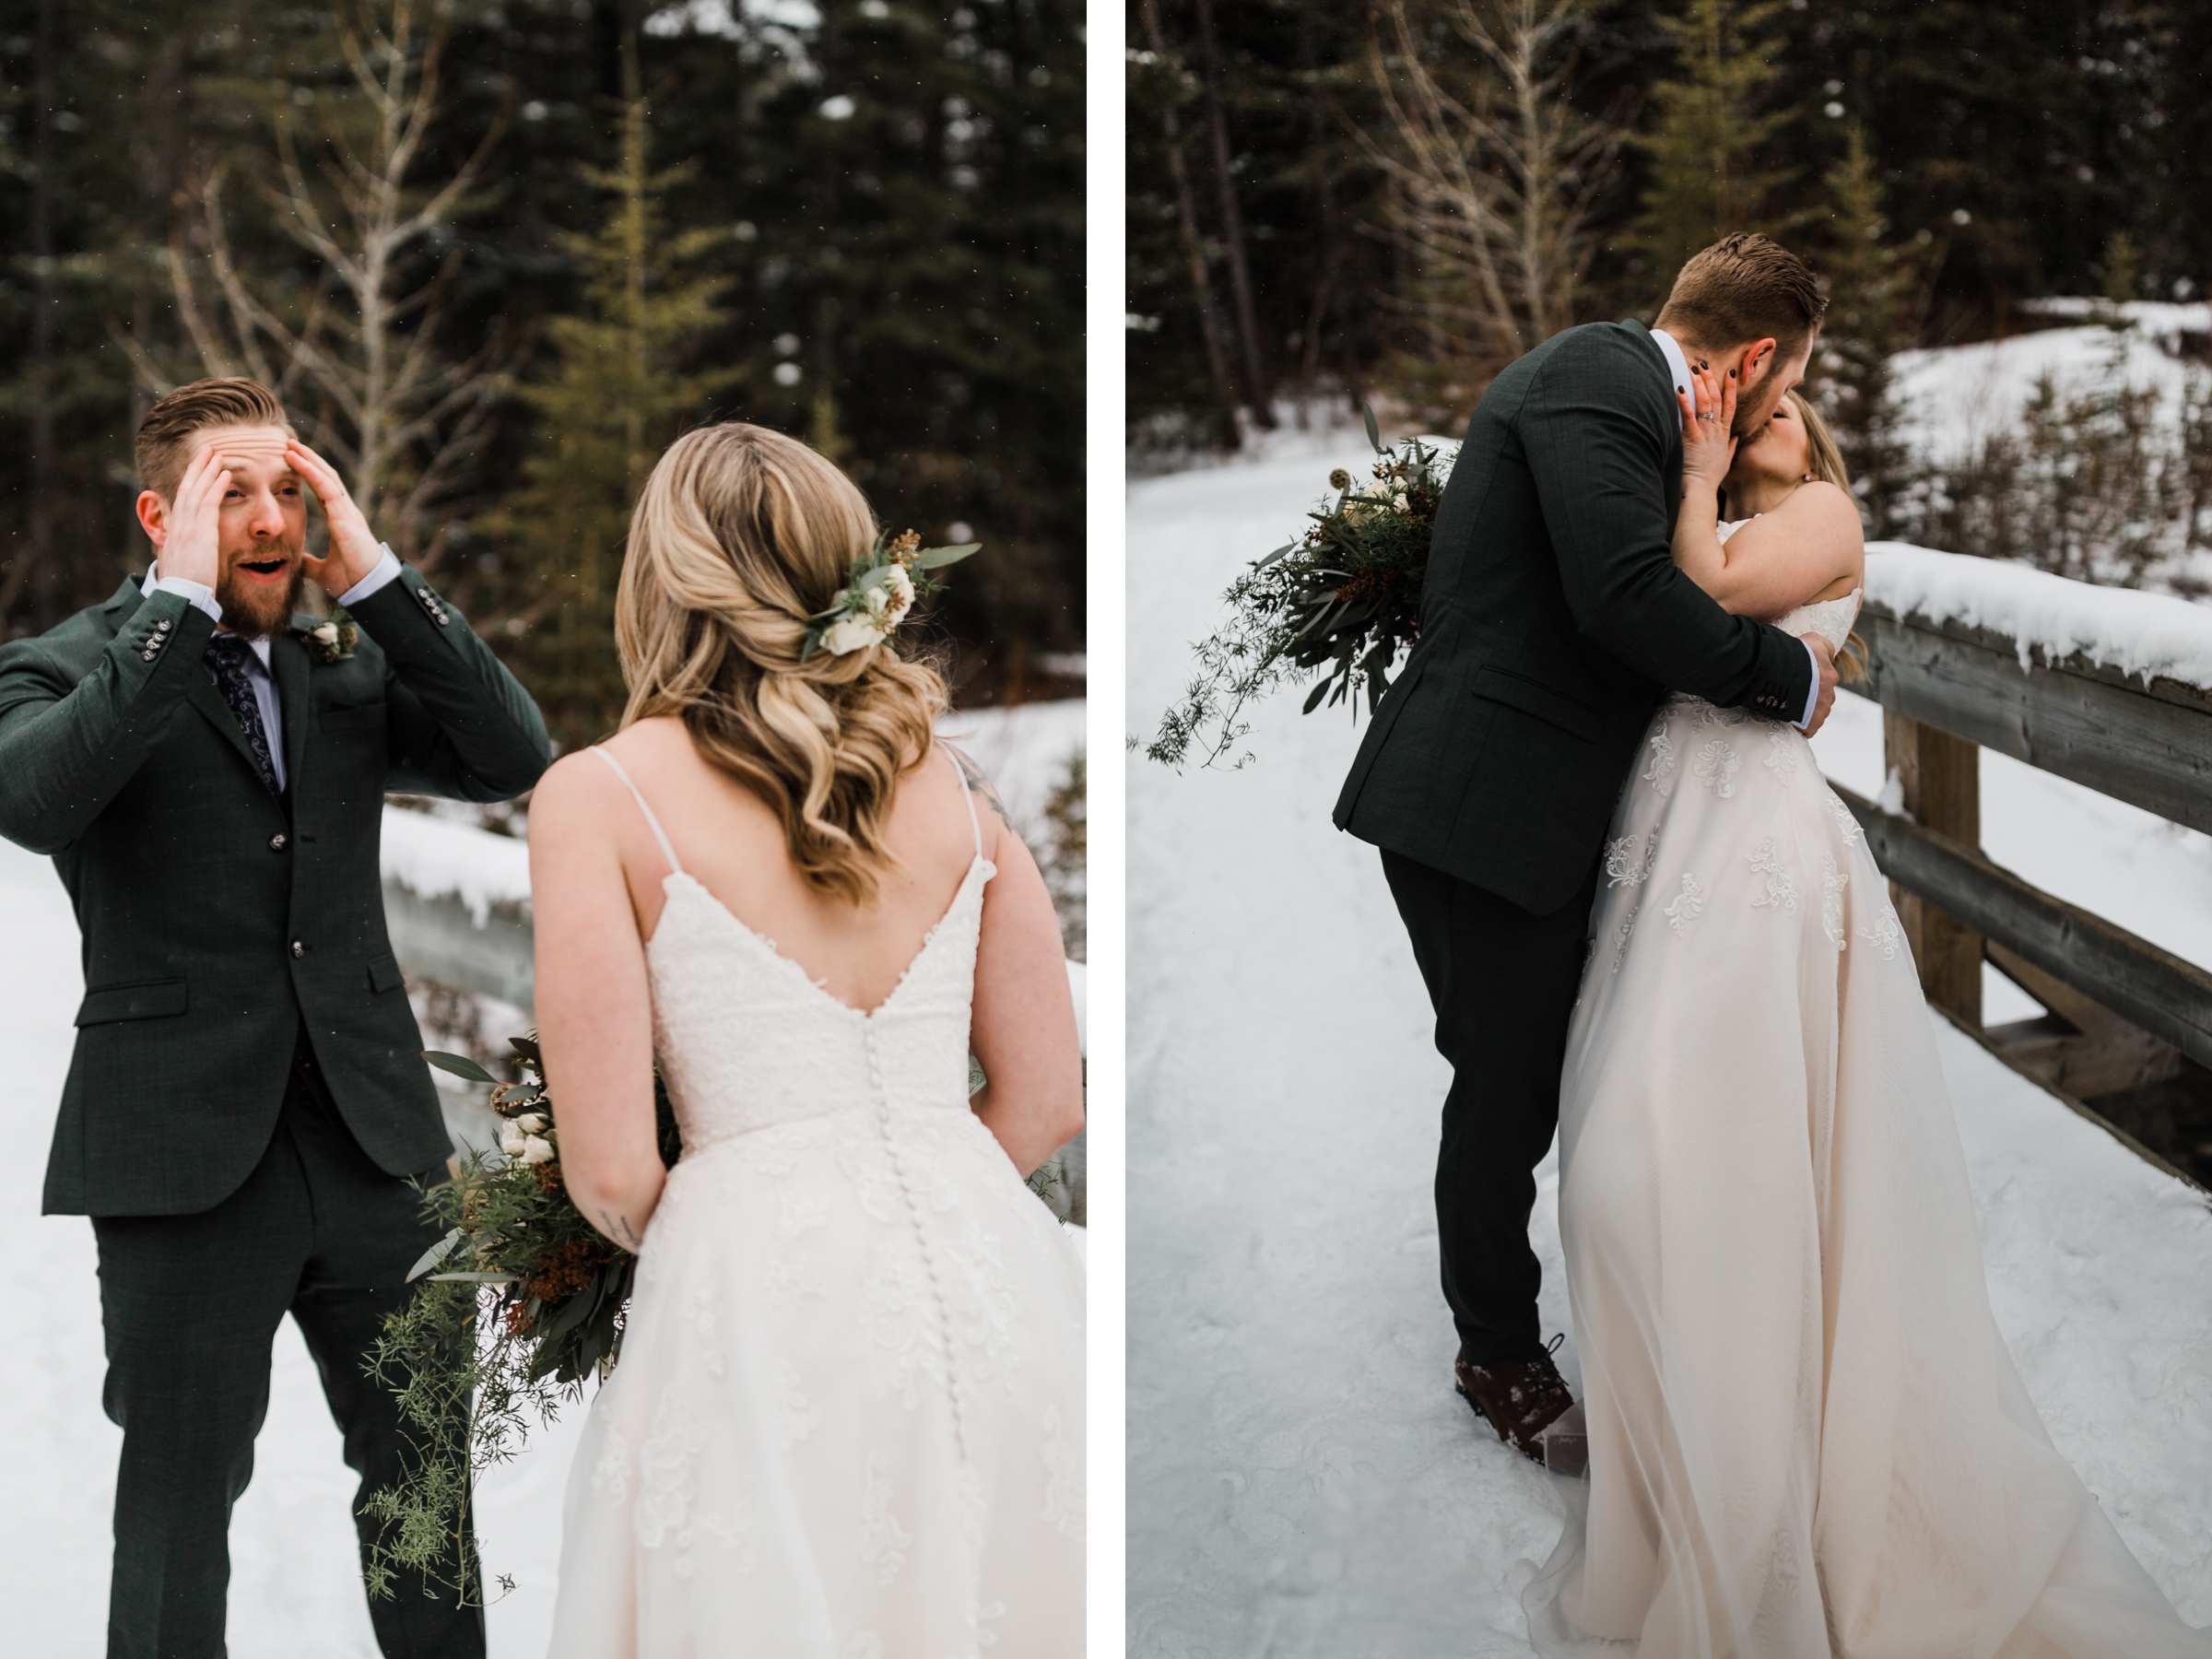 Canmore Elopement Photographer in the Canadian Rockies - Image 16